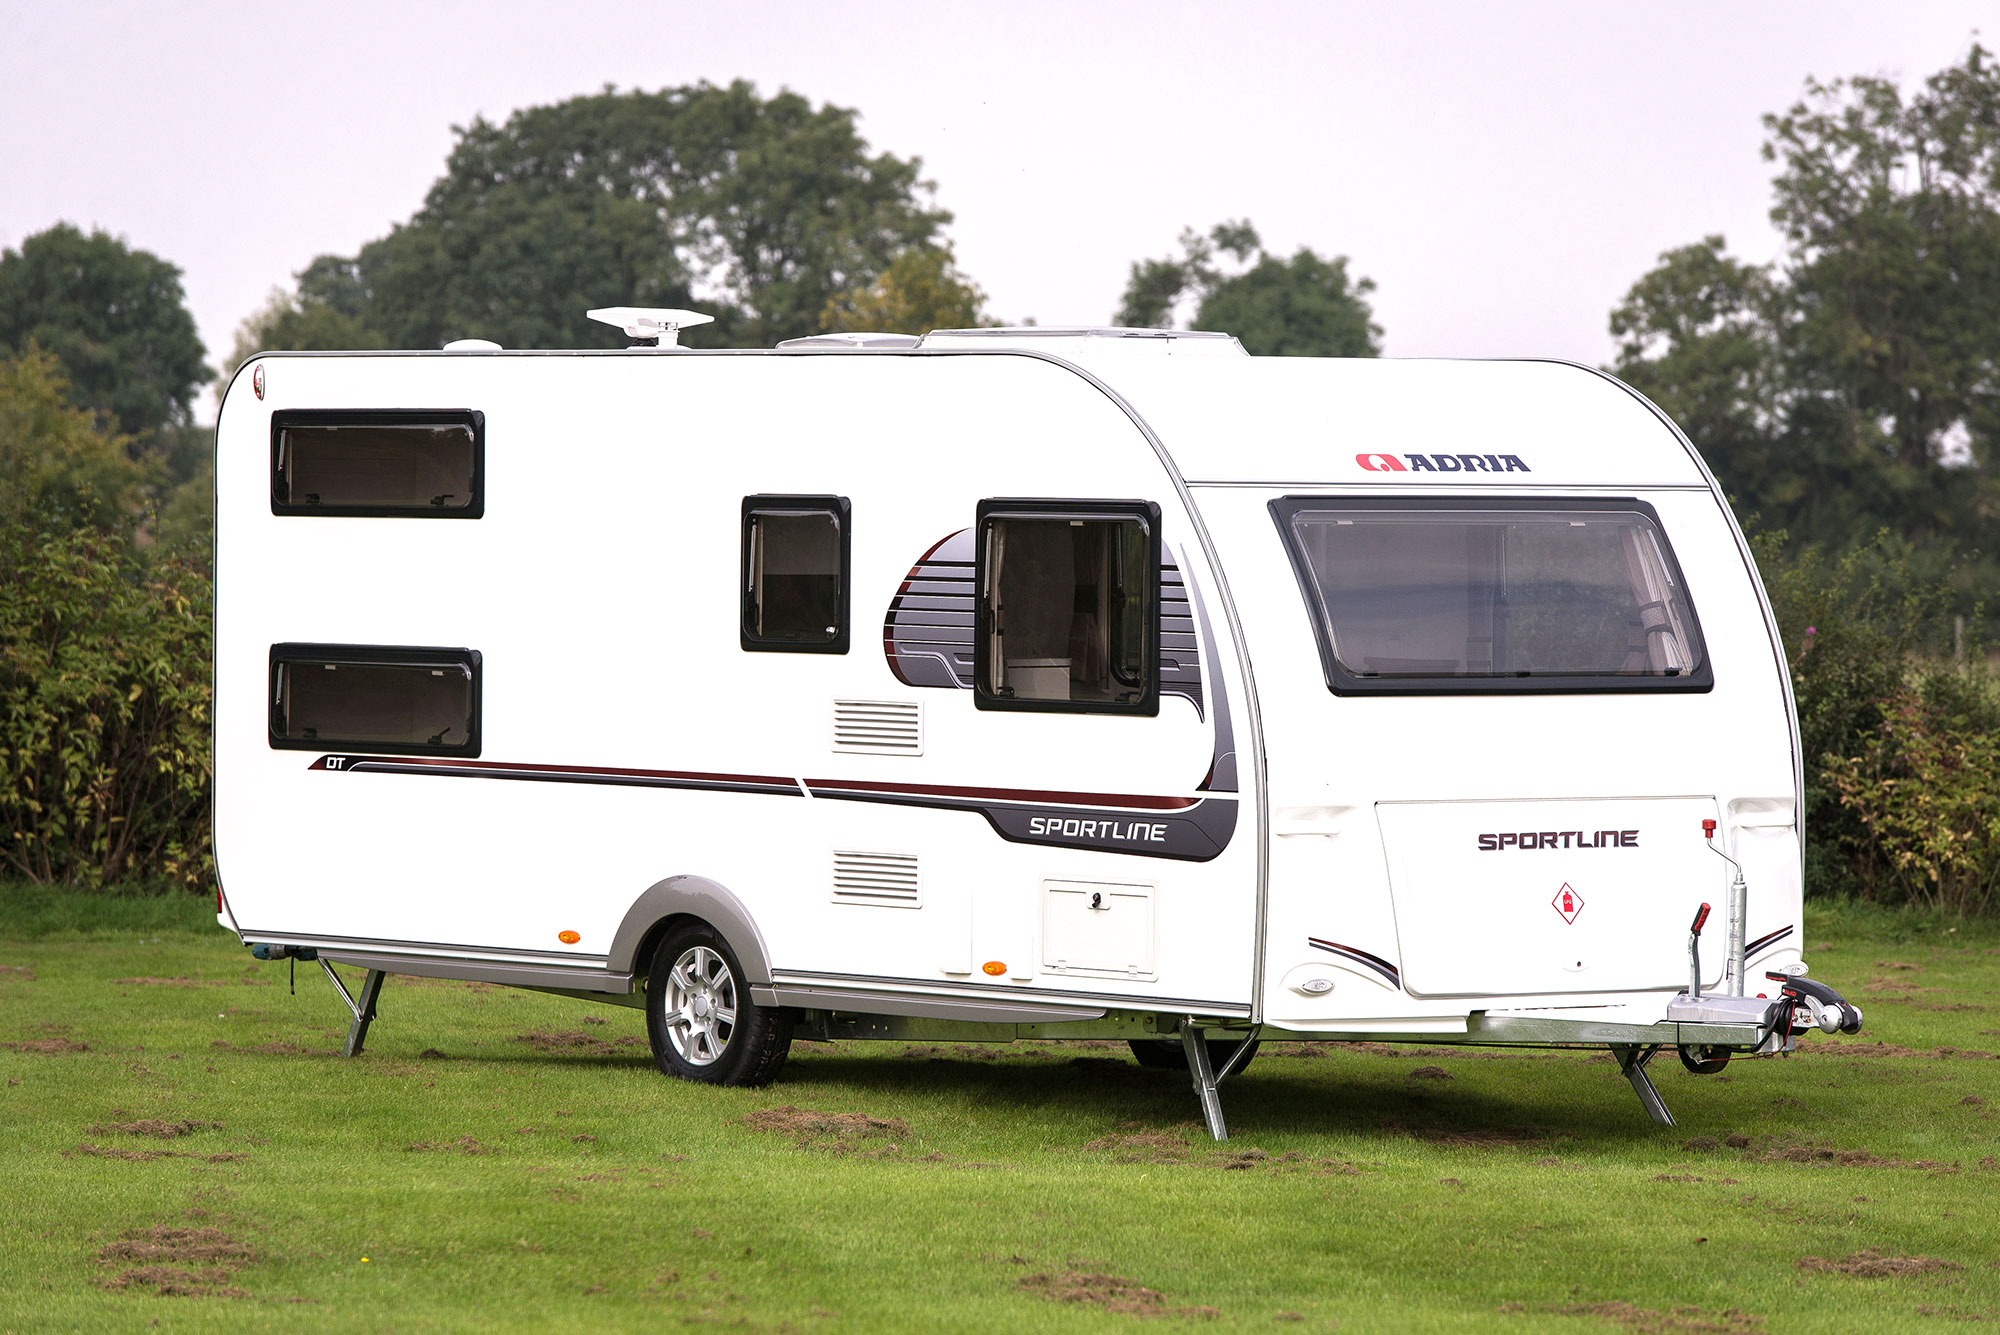 There is no such thing as luxury caravans – Caravanning in the 21st Century